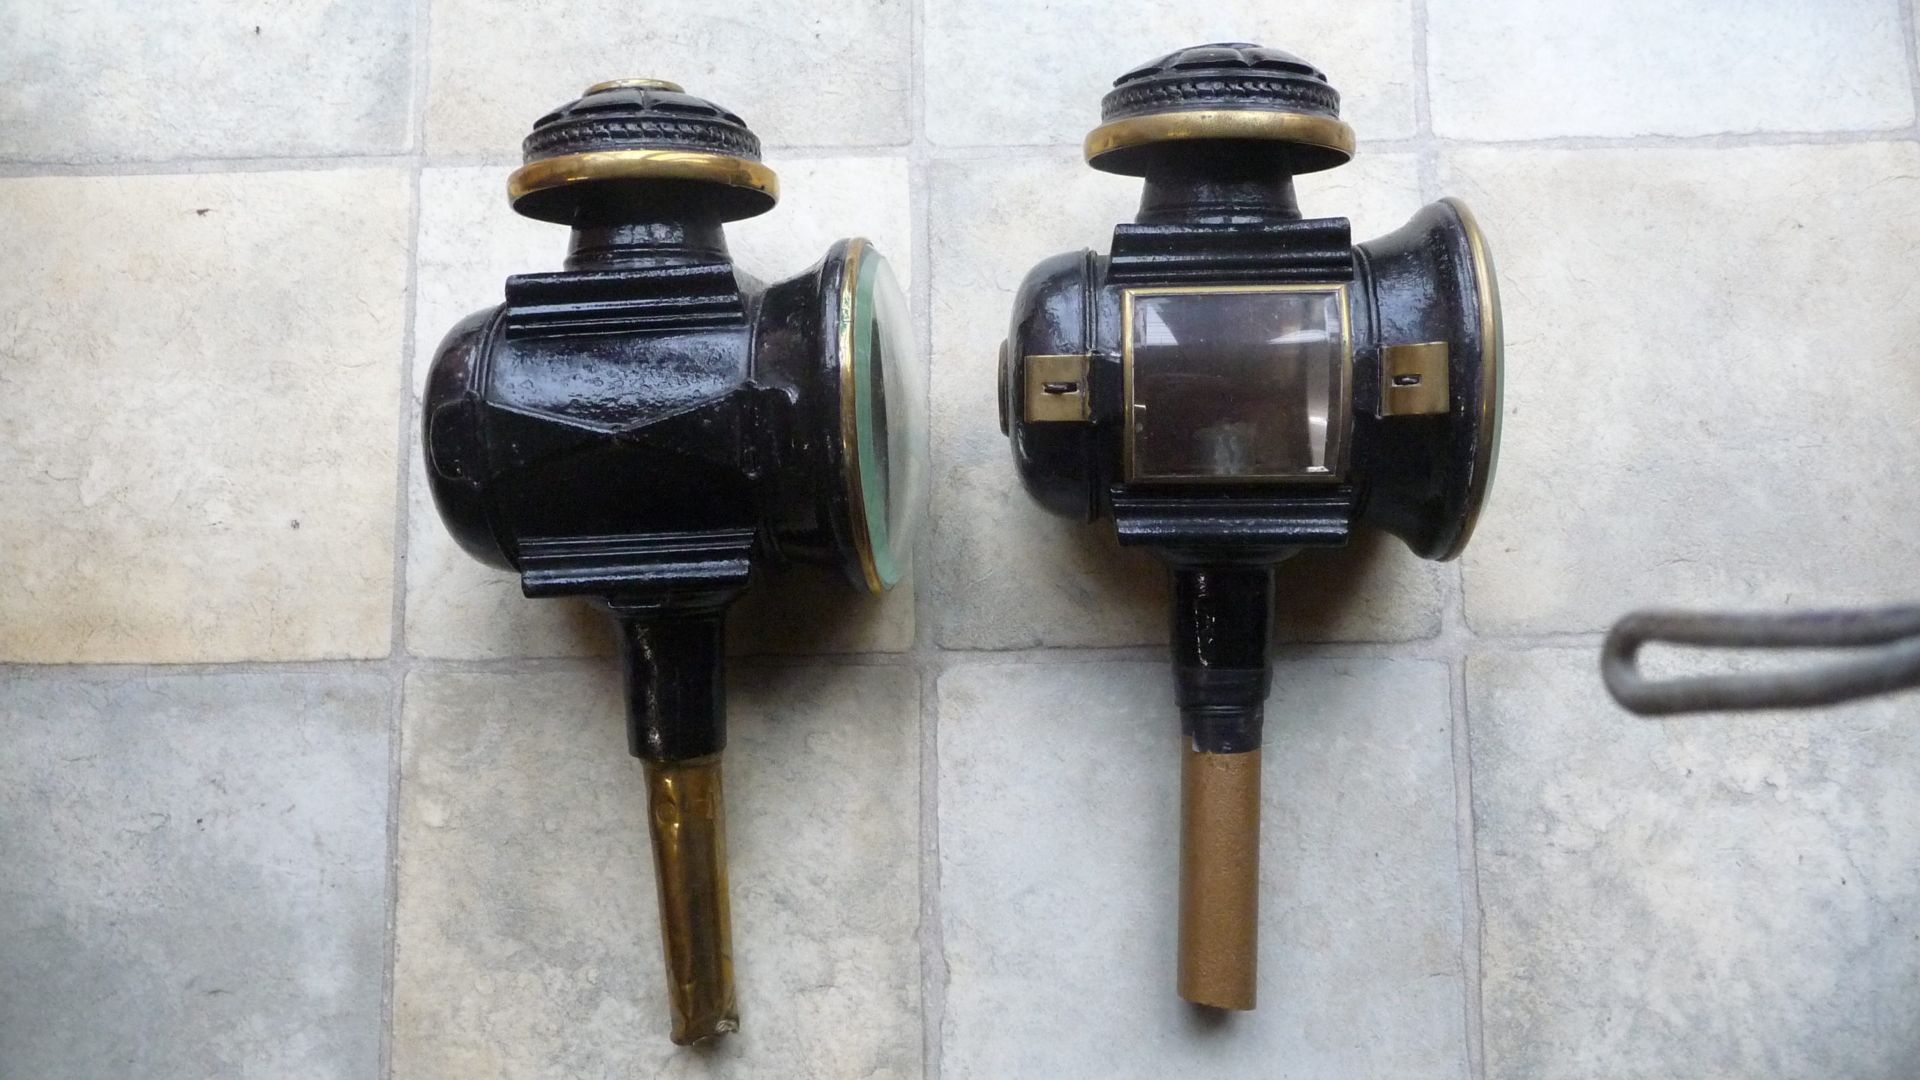 Carriage lamps, one requires a new stem